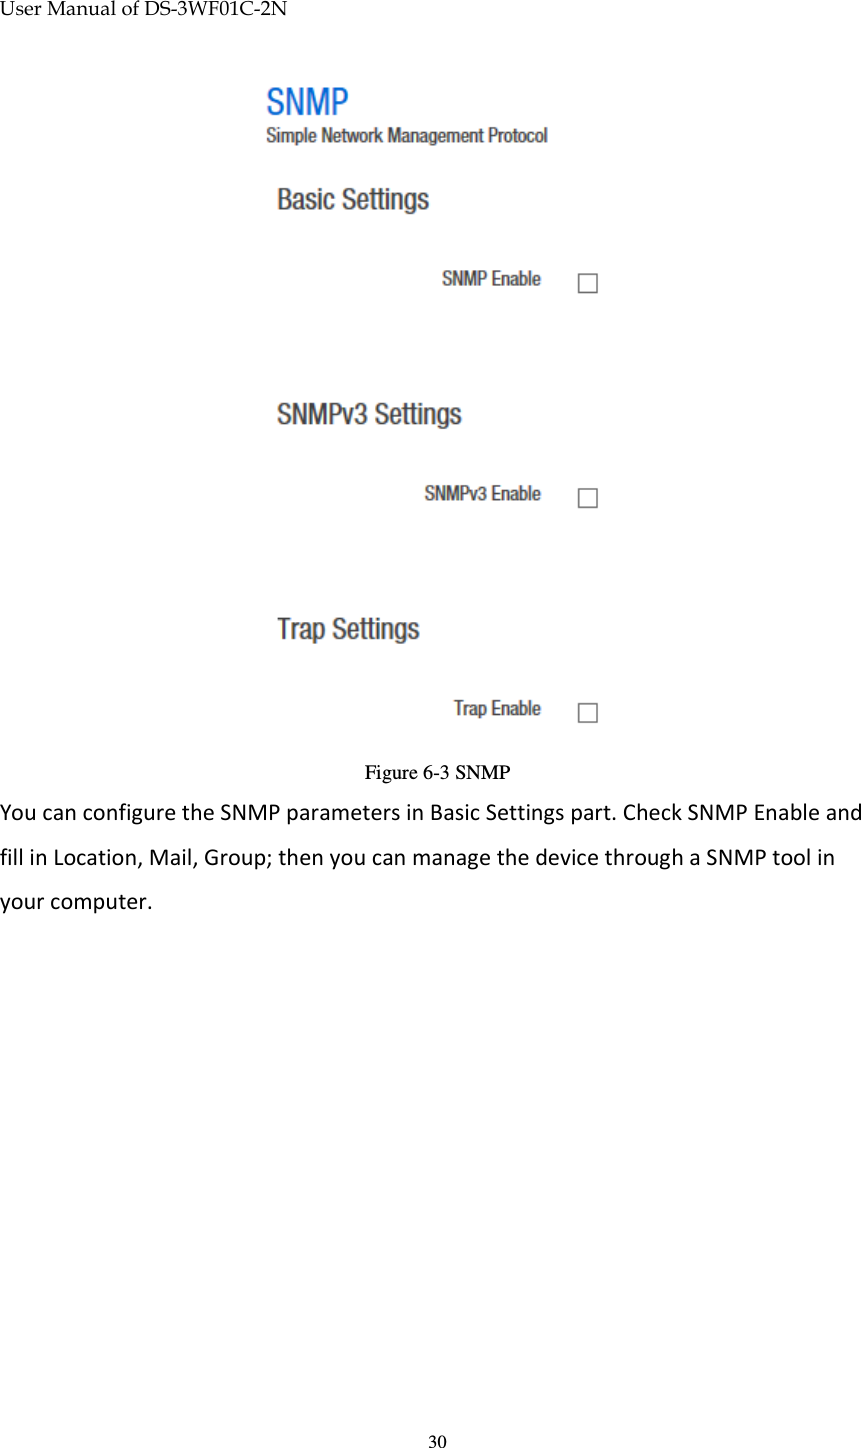 User Manual of DS-3WF01C-2N   30 Figure 6-3 SNMP You can configure the SNMP parameters in Basic Settings part. Check SNMP Enable and fill in Location, Mail, Group; then you can manage the device through a SNMP tool in your computer. 